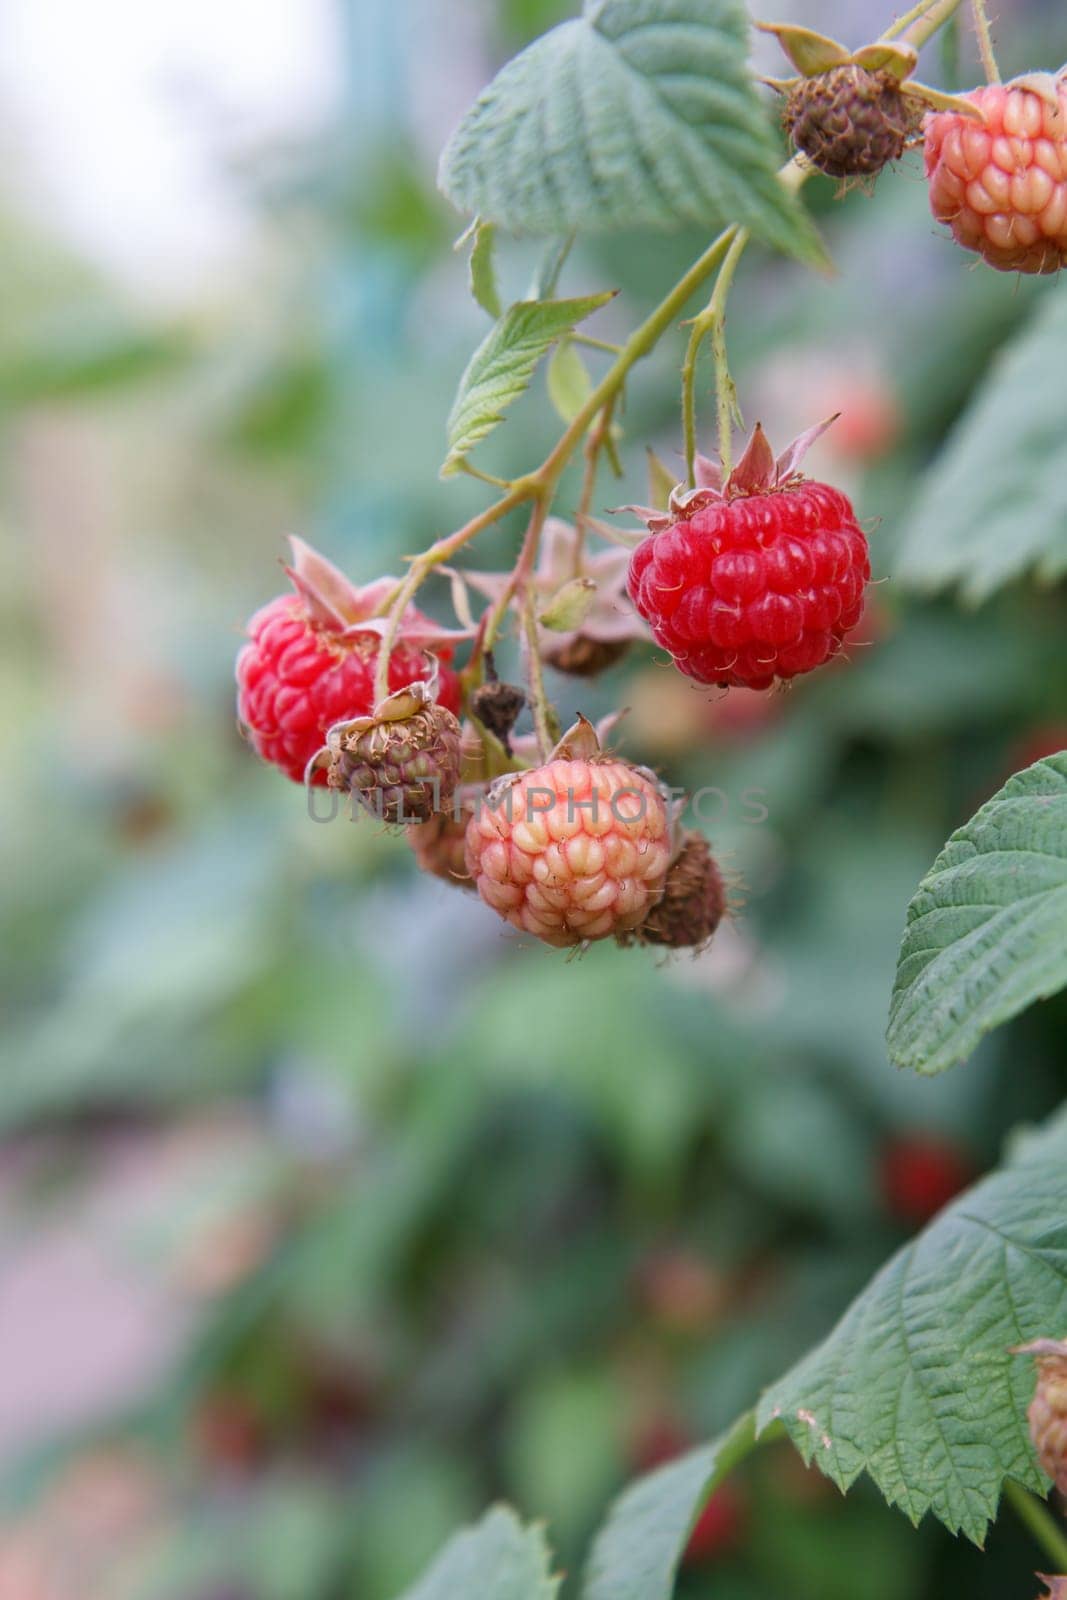 Close-up view of the ripe and unripe raspberries in the fruit garden with blurred natural background. Shallow depth of field.